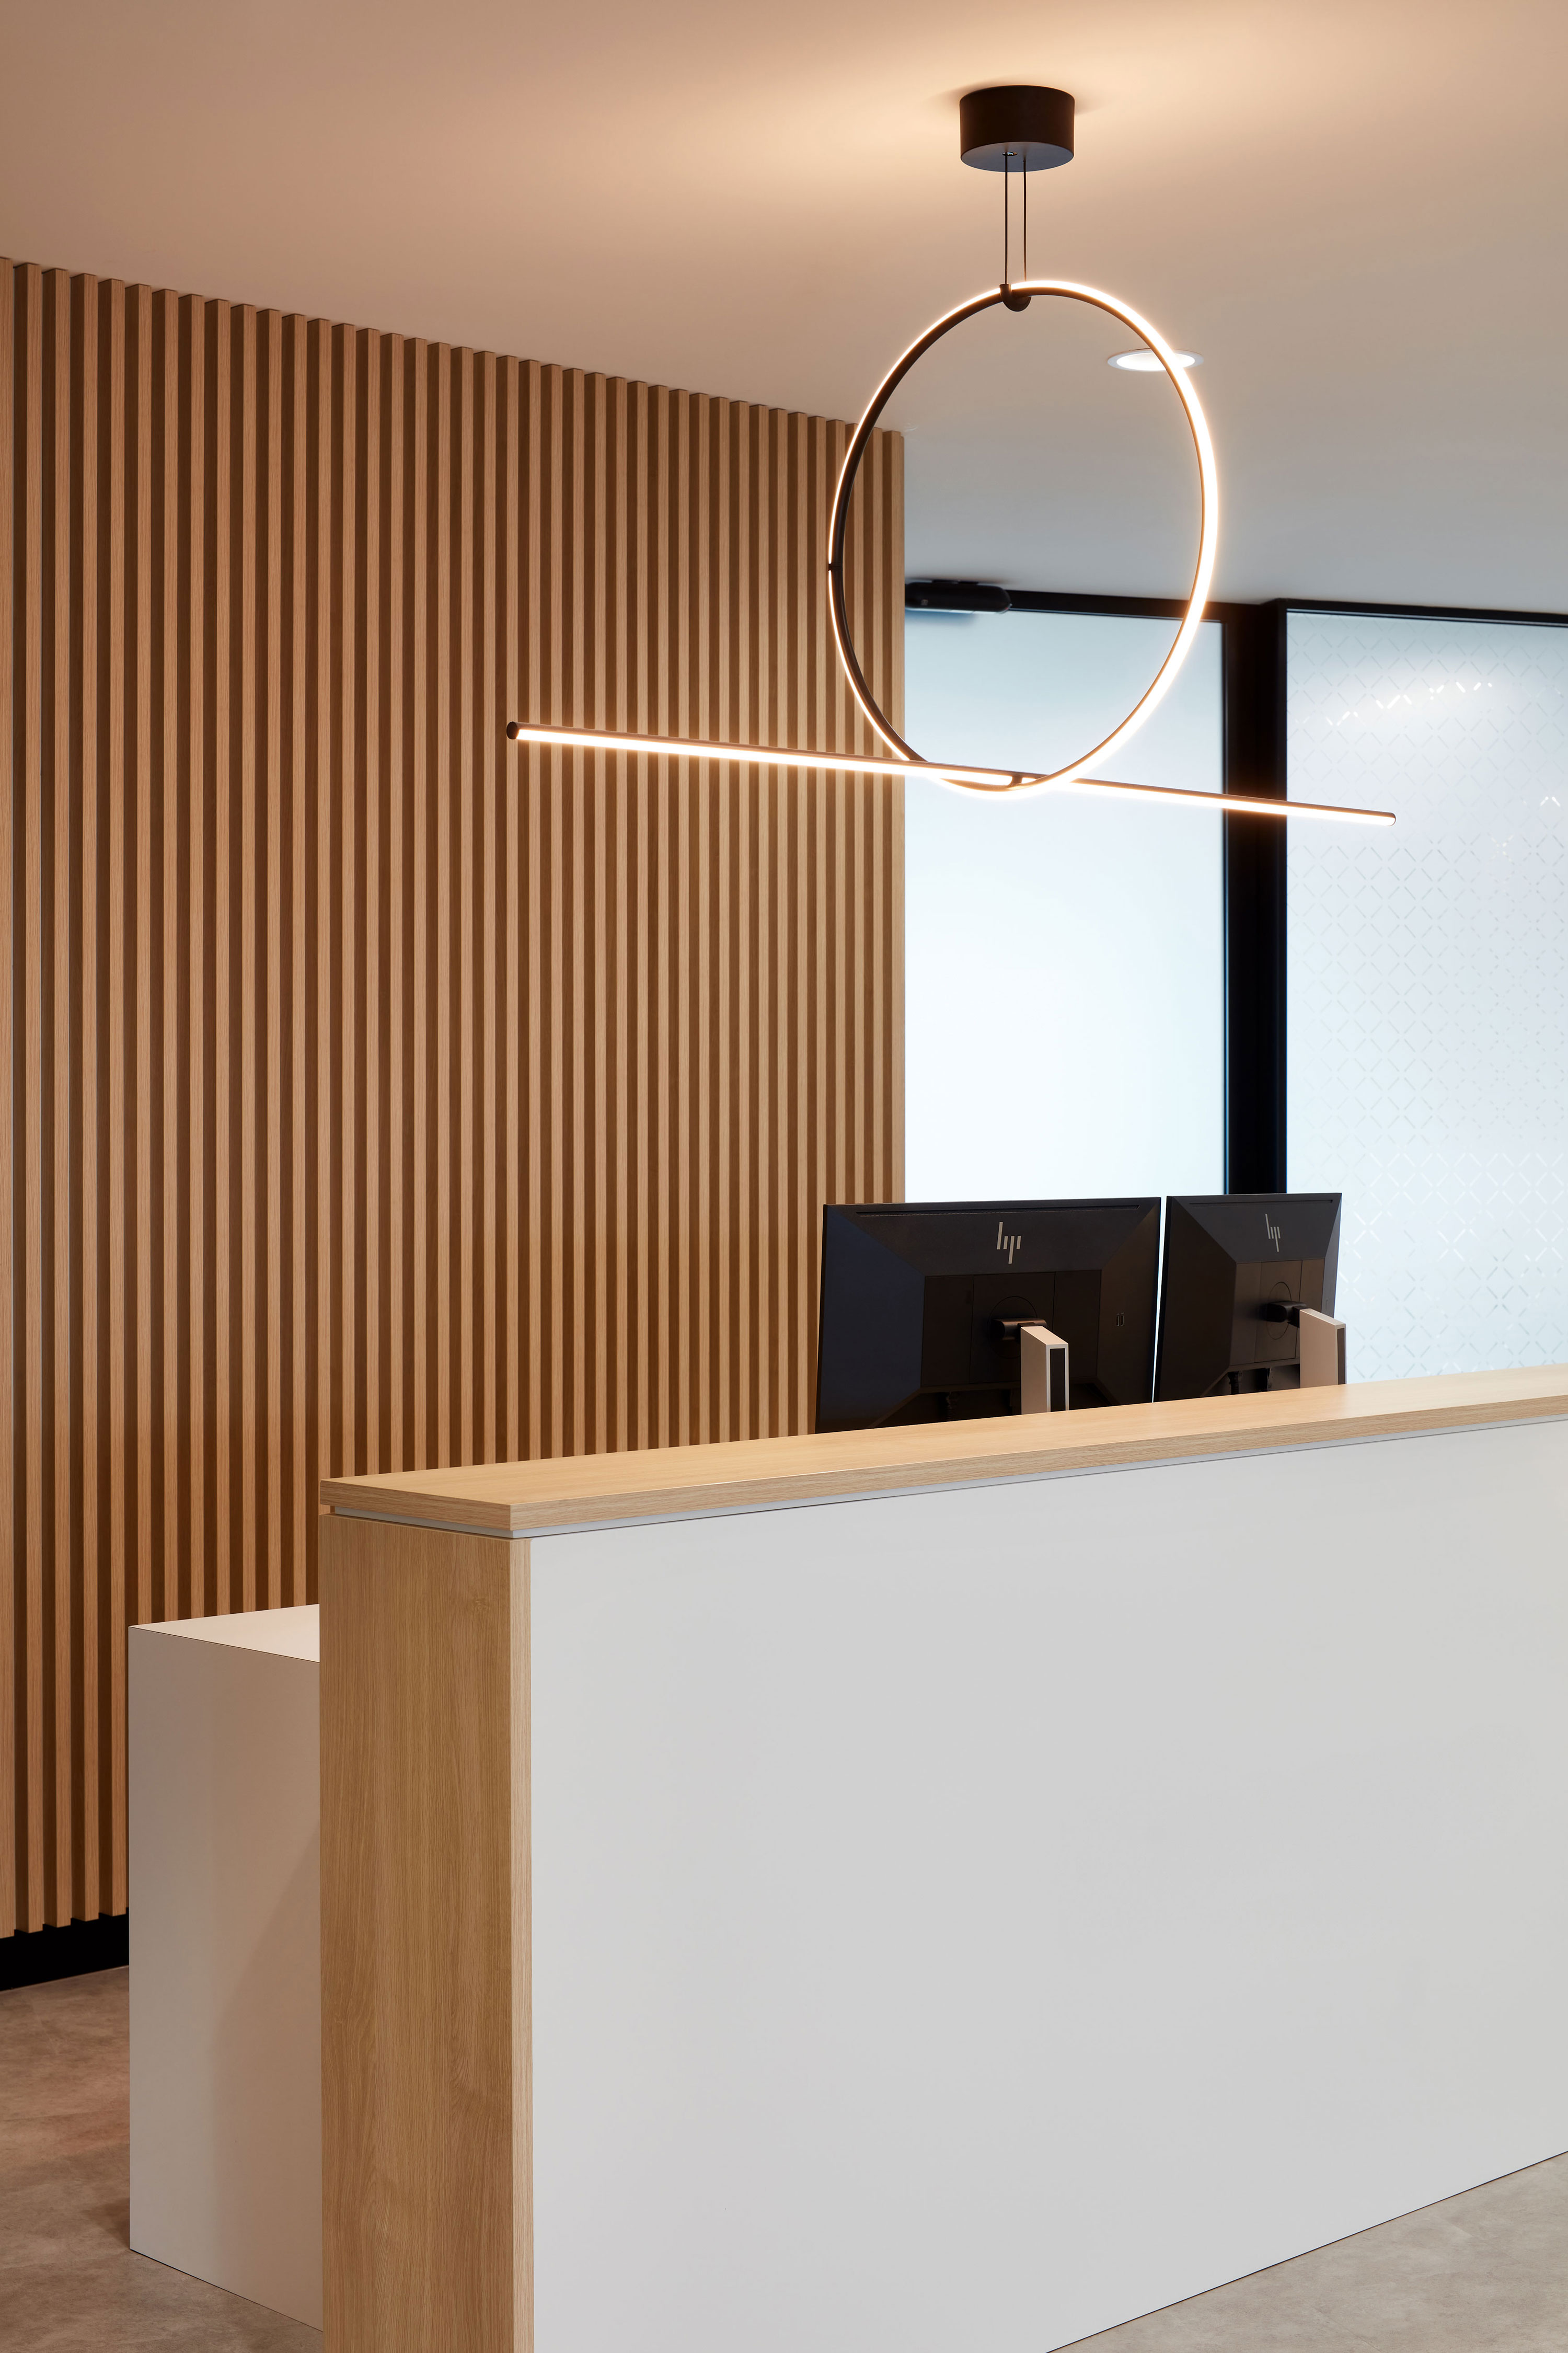 Reception desk at global pharmaceuticals company